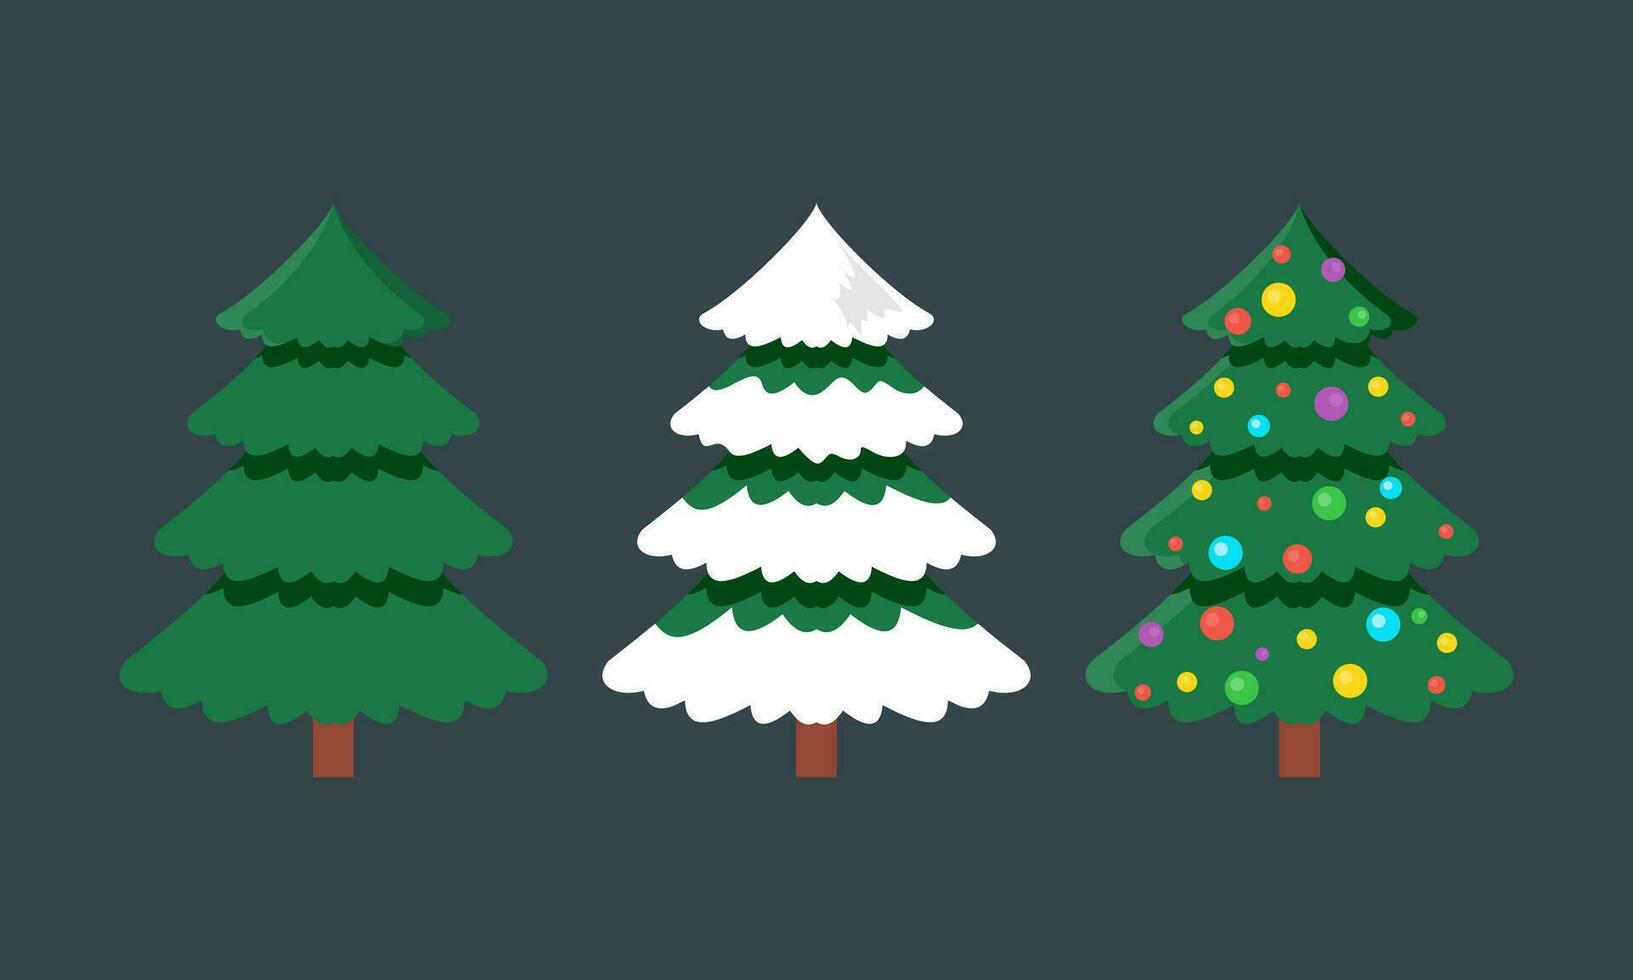 Cartoon Decorated Christmas Trees Collection with Balls, Stars, and Garland Fir Trees Illustration vector